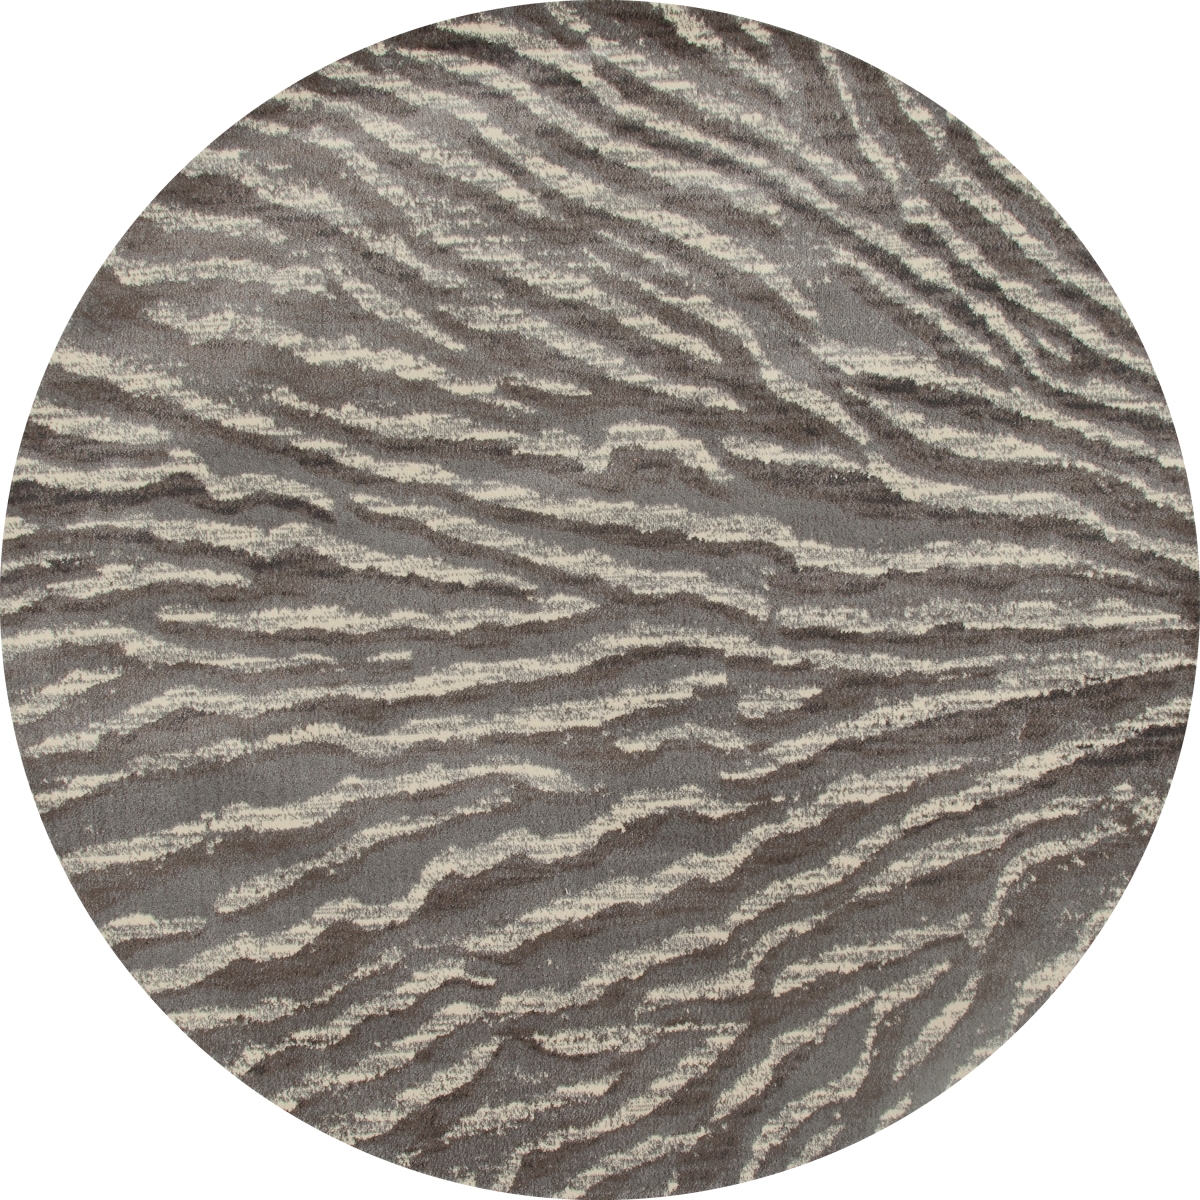 25986 5 Ft. Troy Collection Ripple Woven Round Area Rug, Gray